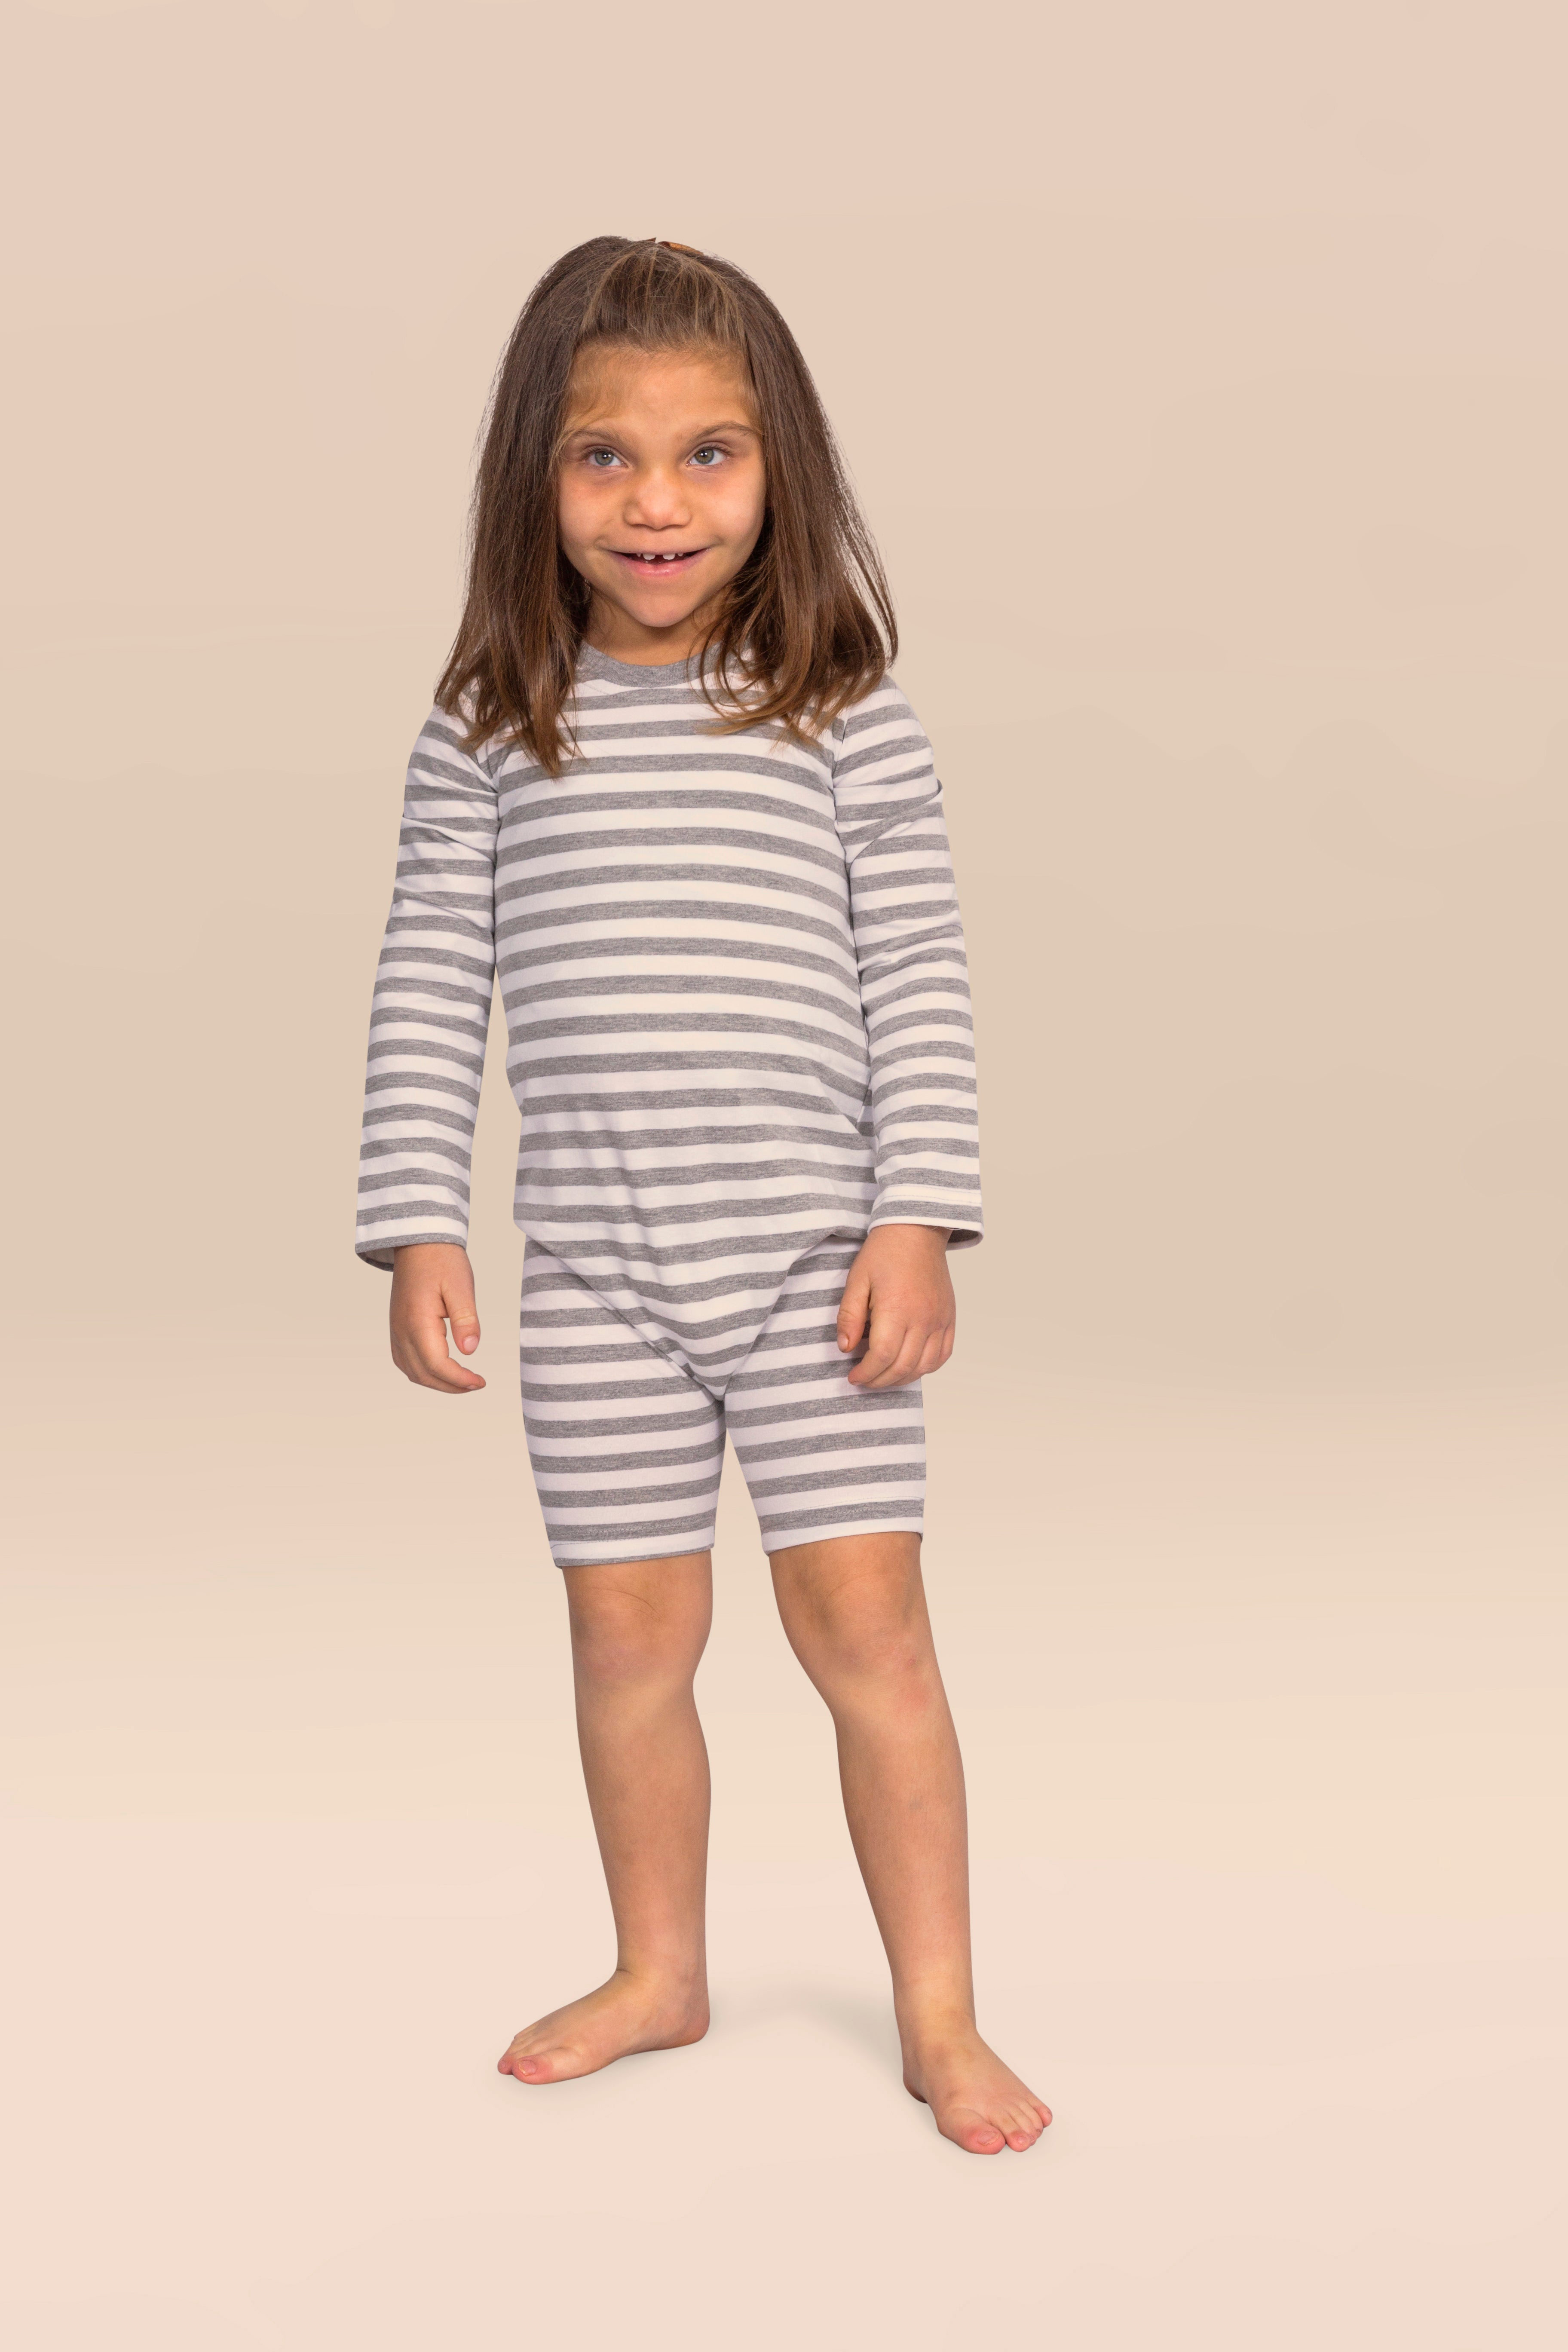 KayCey_Adaptive_clothing_for_older_children_with_special_needs_Zip_Back_grey-white_Long_Sleeve_lifestyle_img